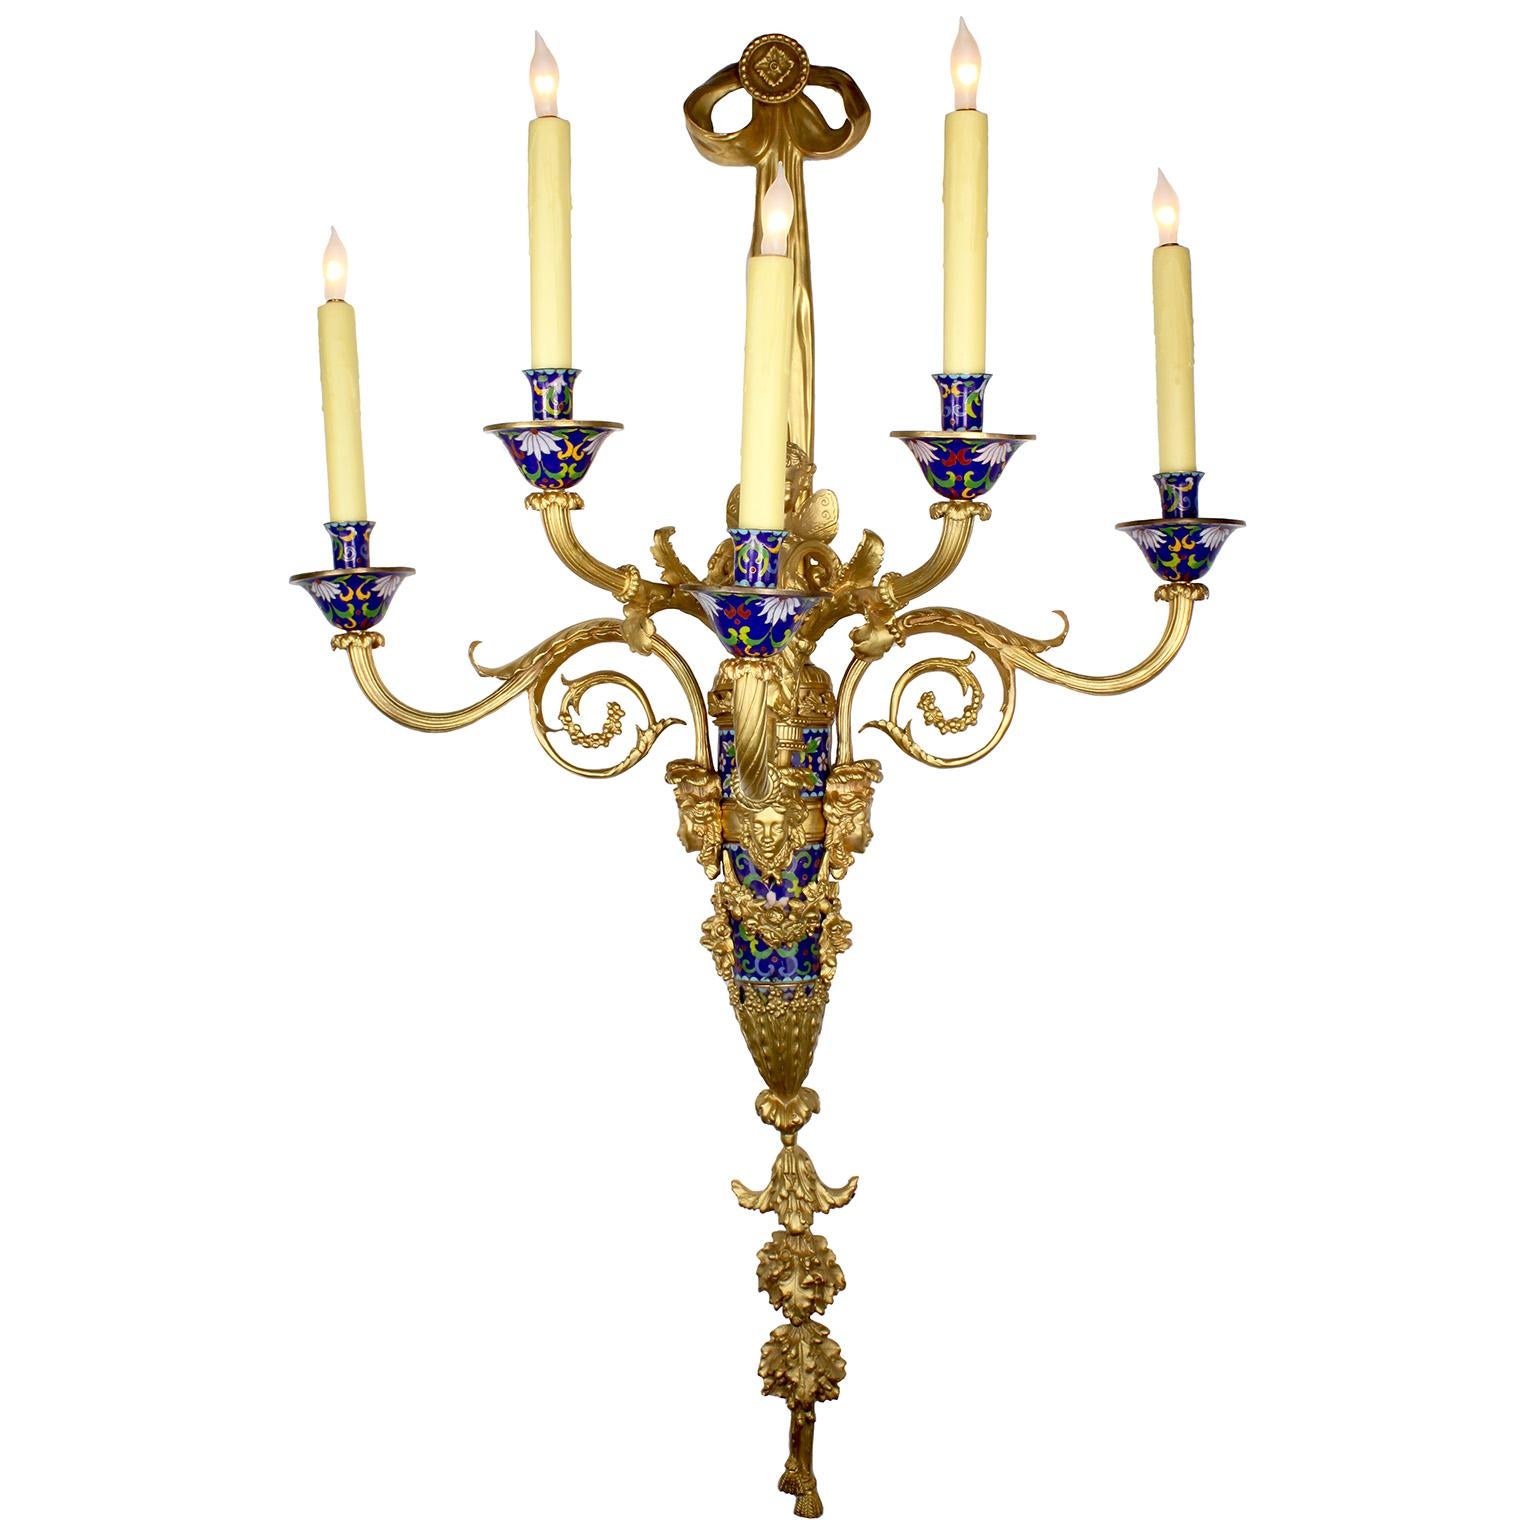 A large and impressive pair of Louis XVI style gilt-metal and champlevé enamel five-light figural wall lights (sconces - appliques) after the model by Pierre-Philippe Thomire (French, 1751–1843). Each sconce with a ribbon-hung reeded and tapering